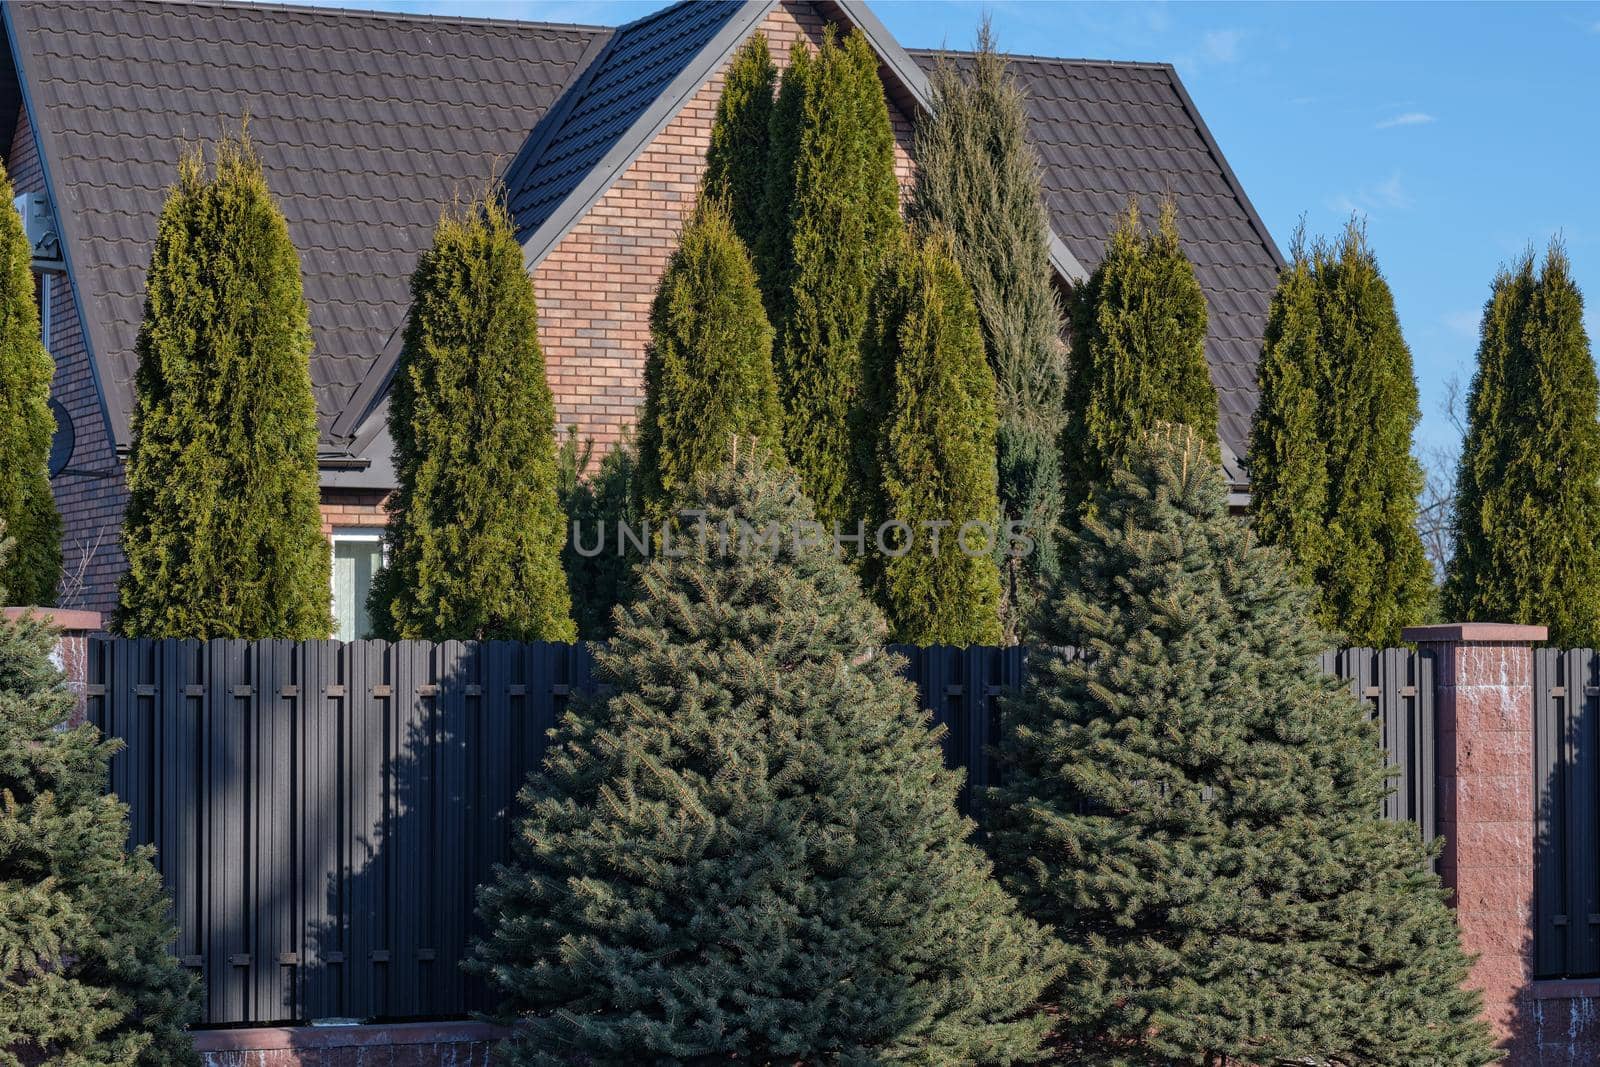 Decorative trees along the fence, as a hedge.